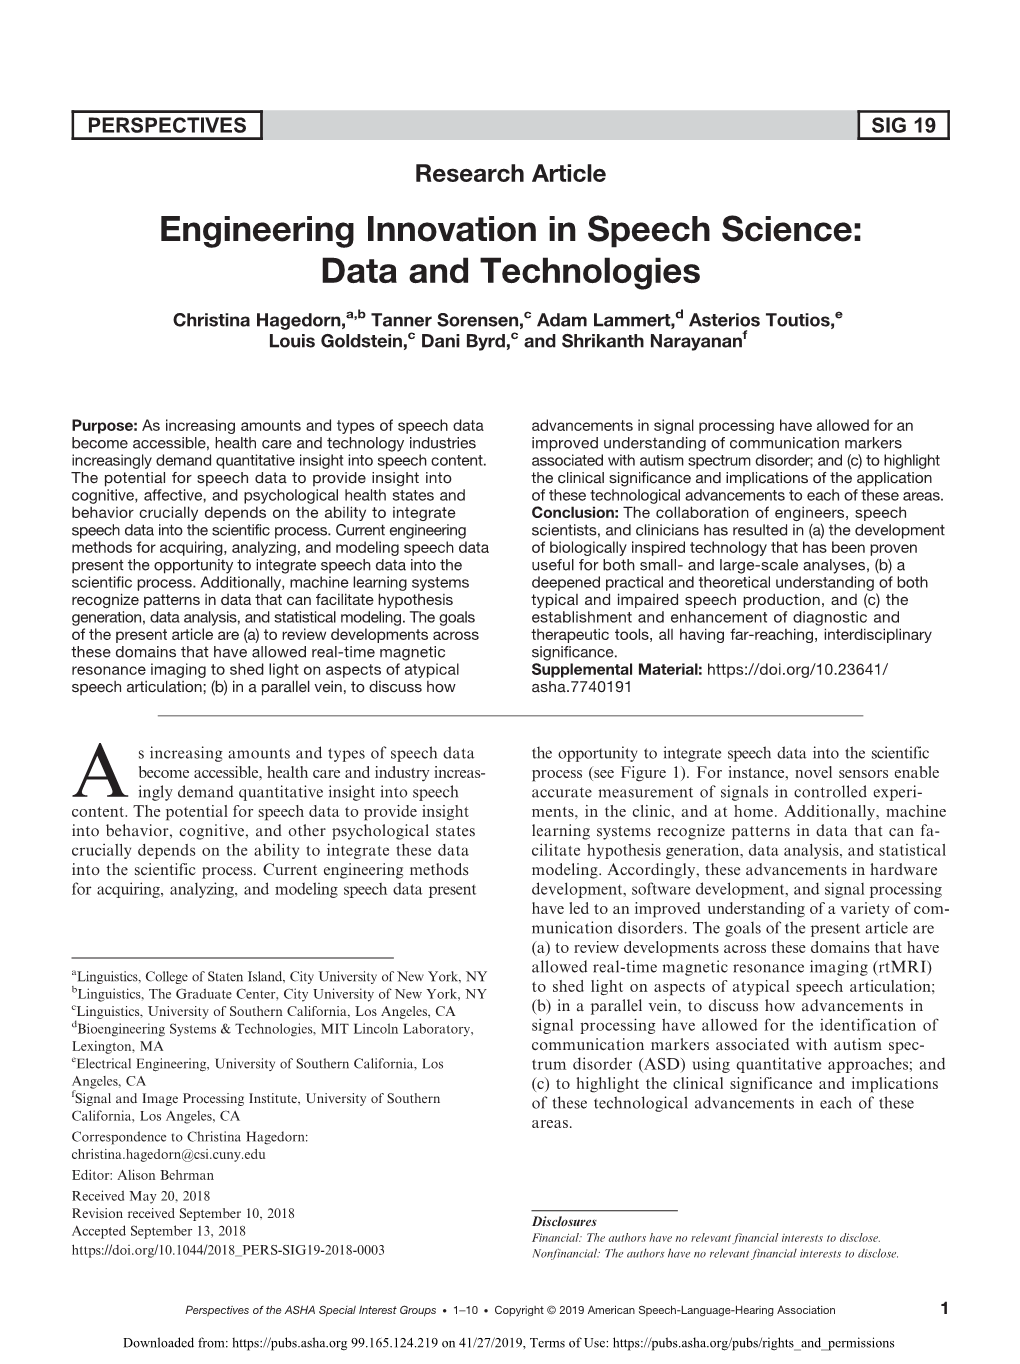 Engineering Innovation in Speech Science: Data and Technologies